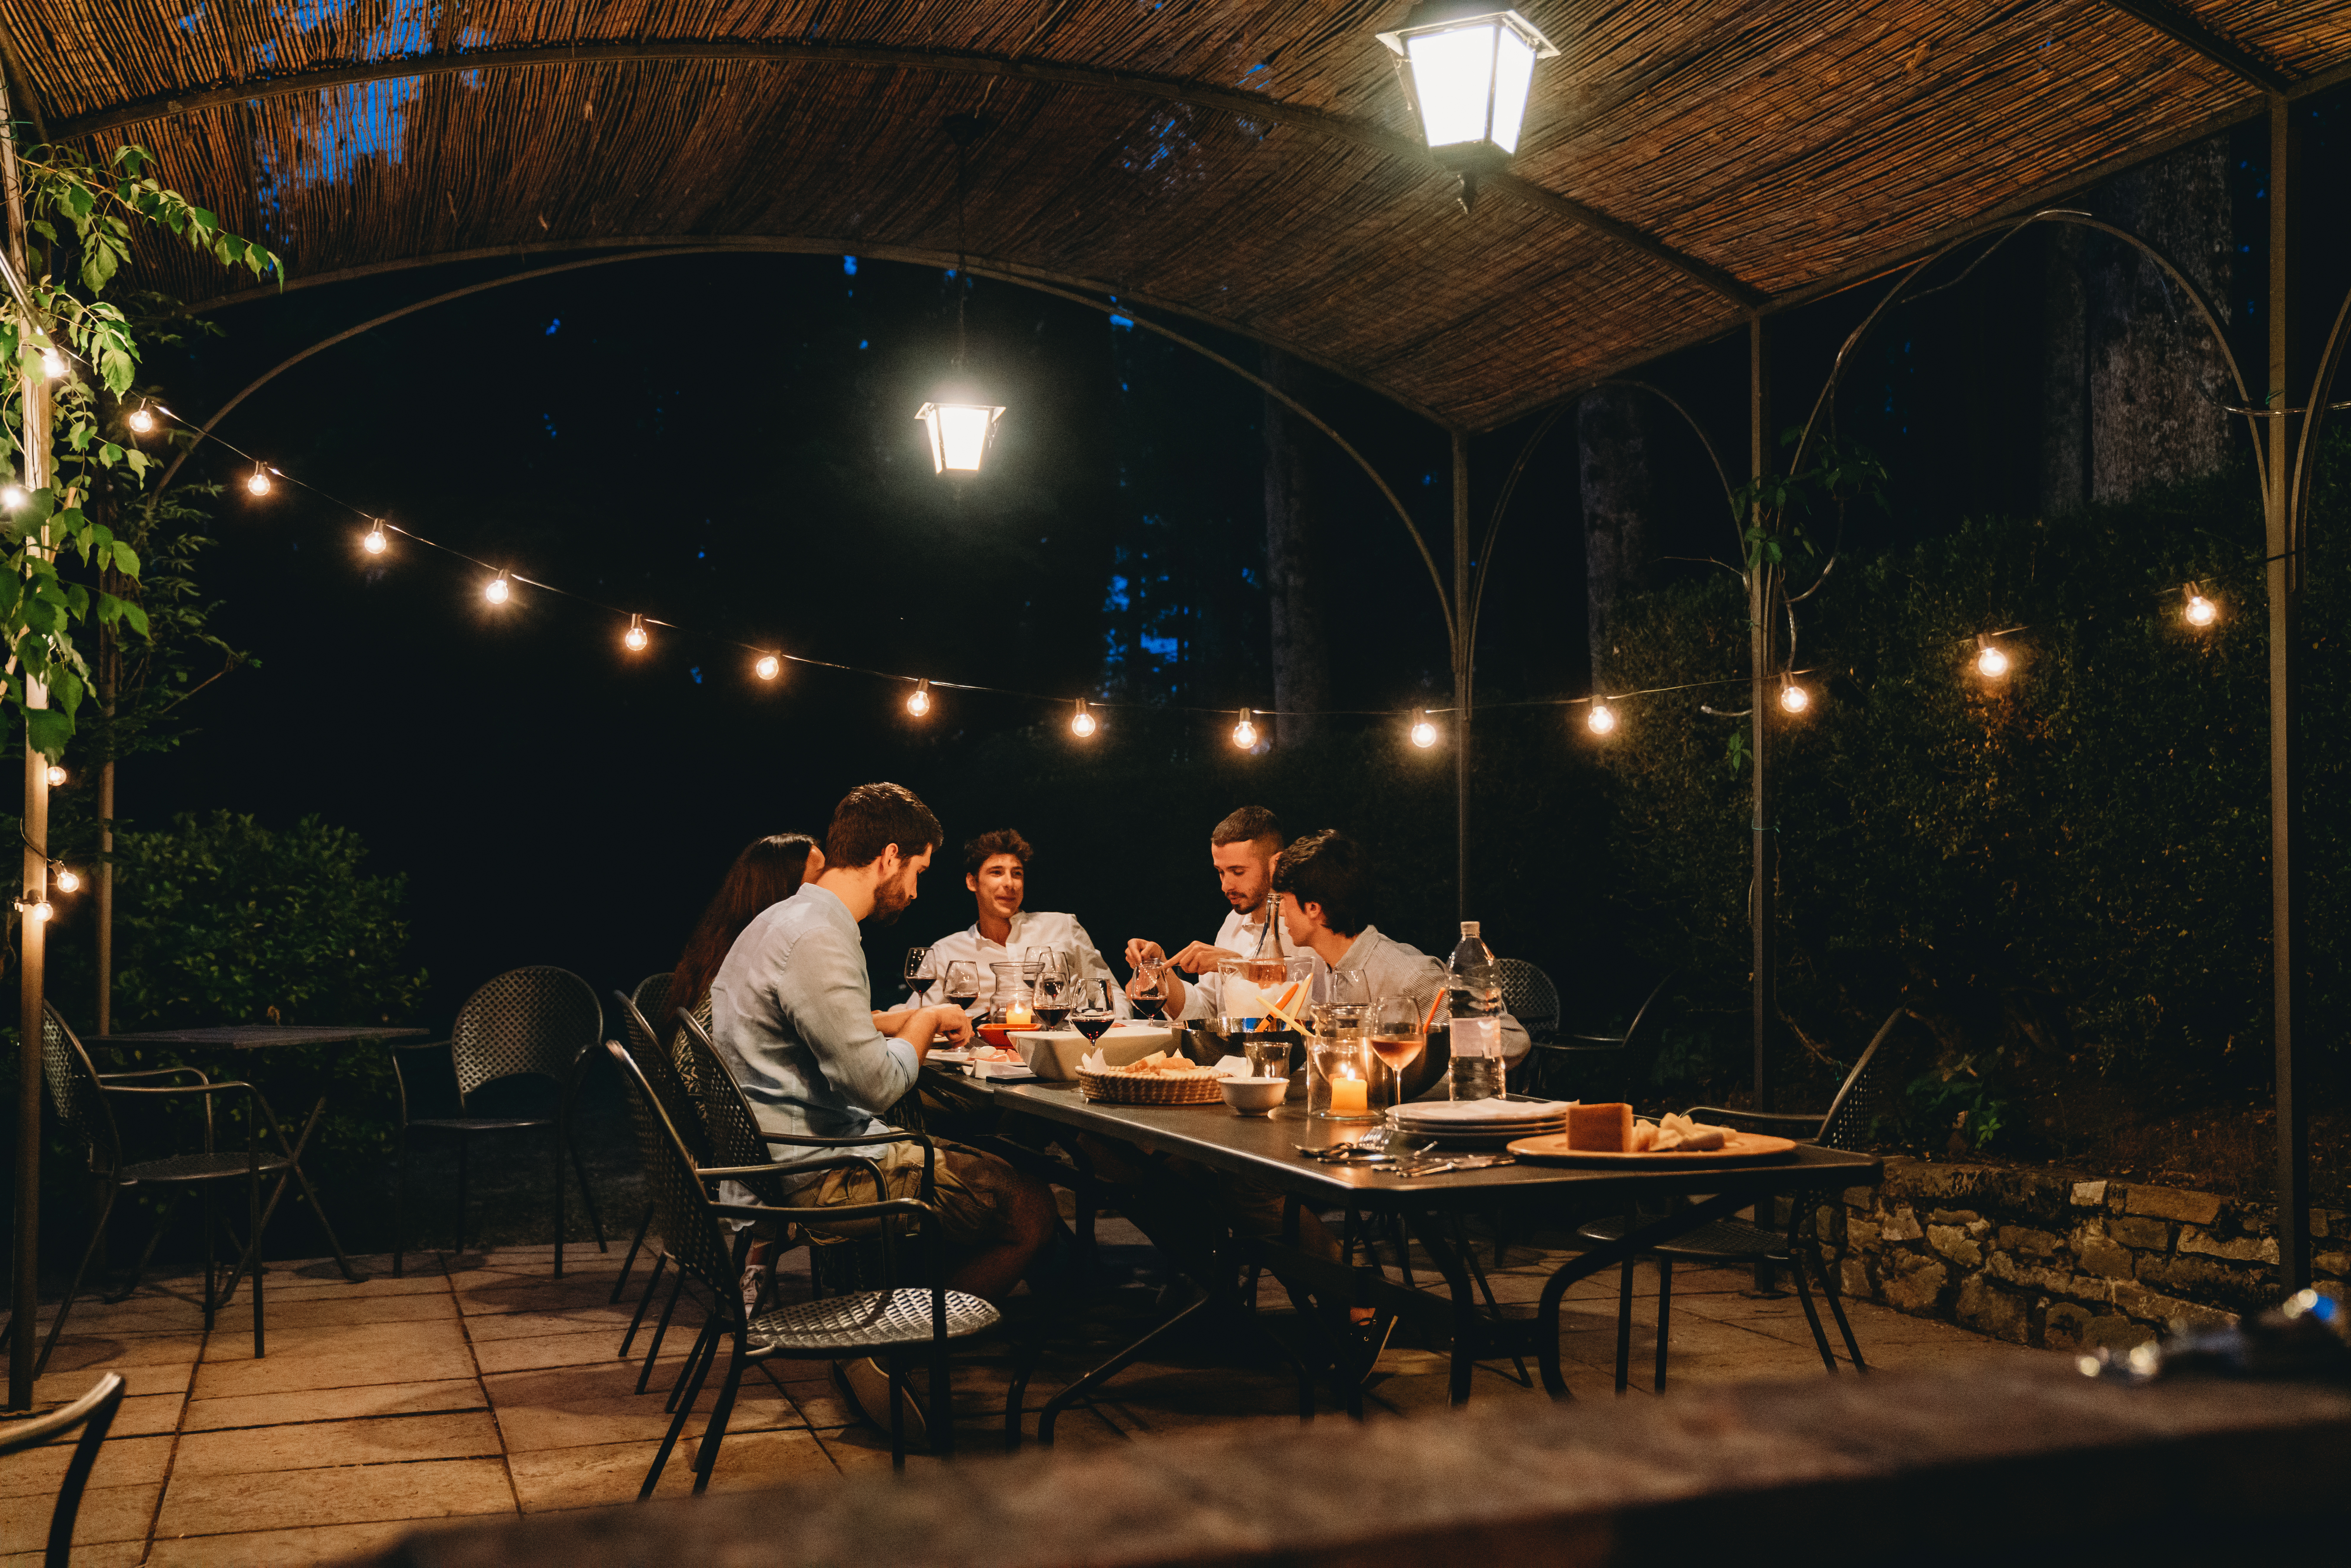 Friends are dining together in a farmhouse at night